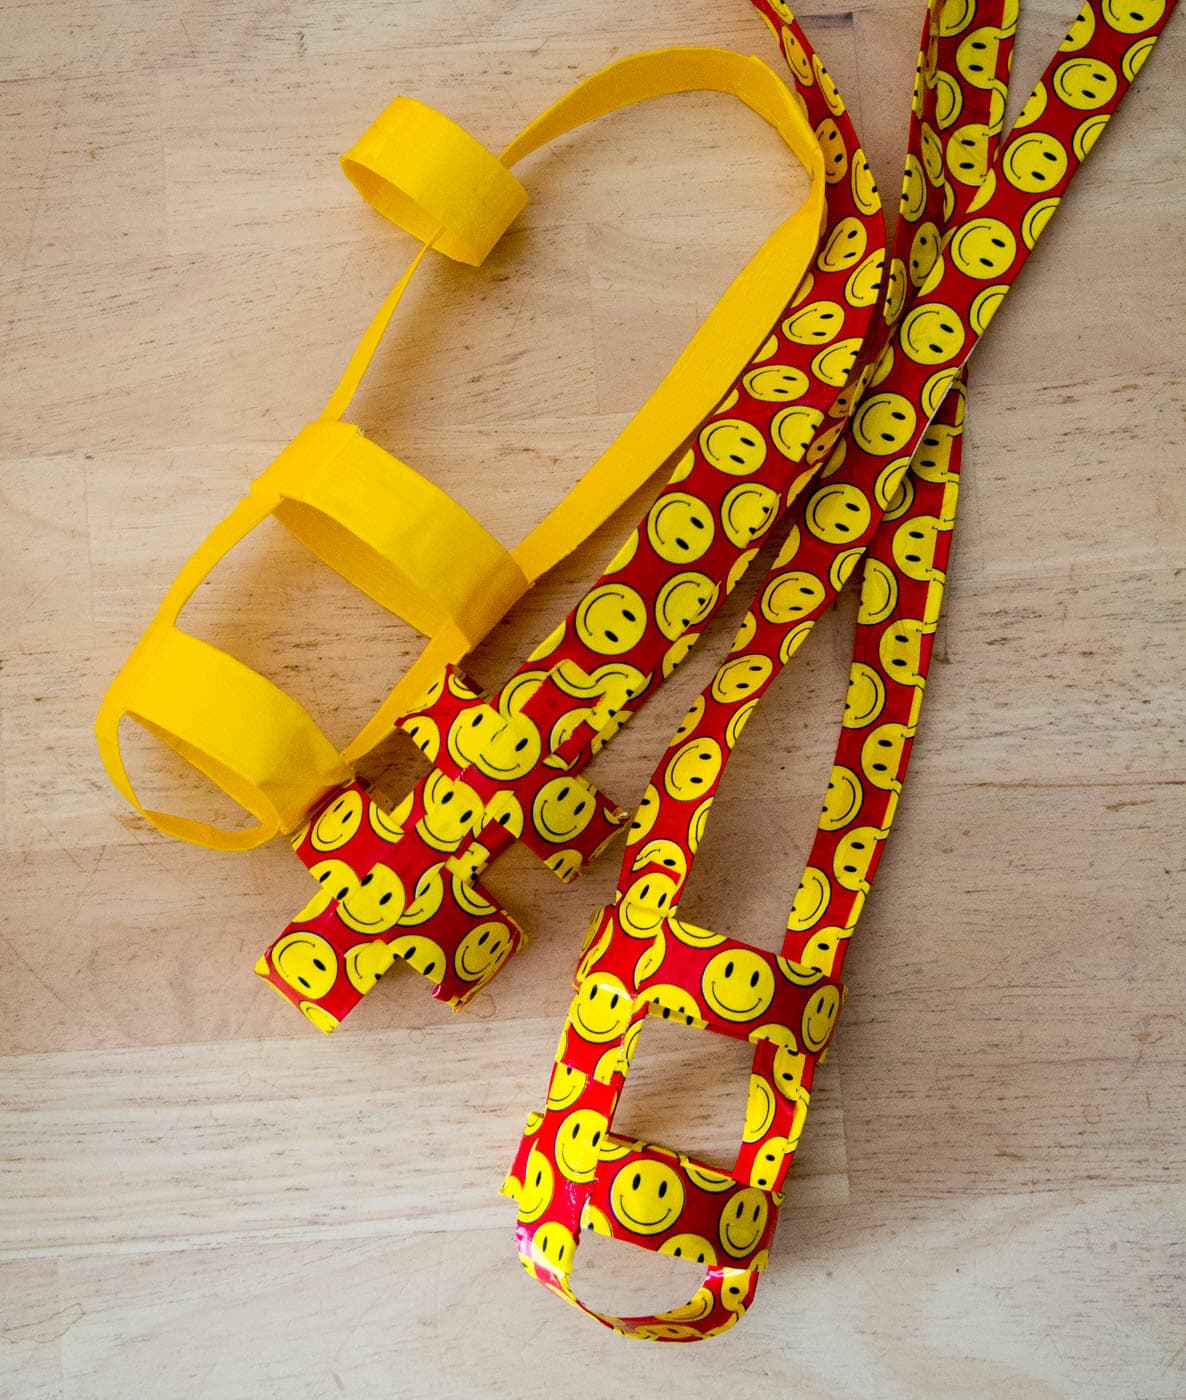 A yellow dog leash with smiley faces on it.